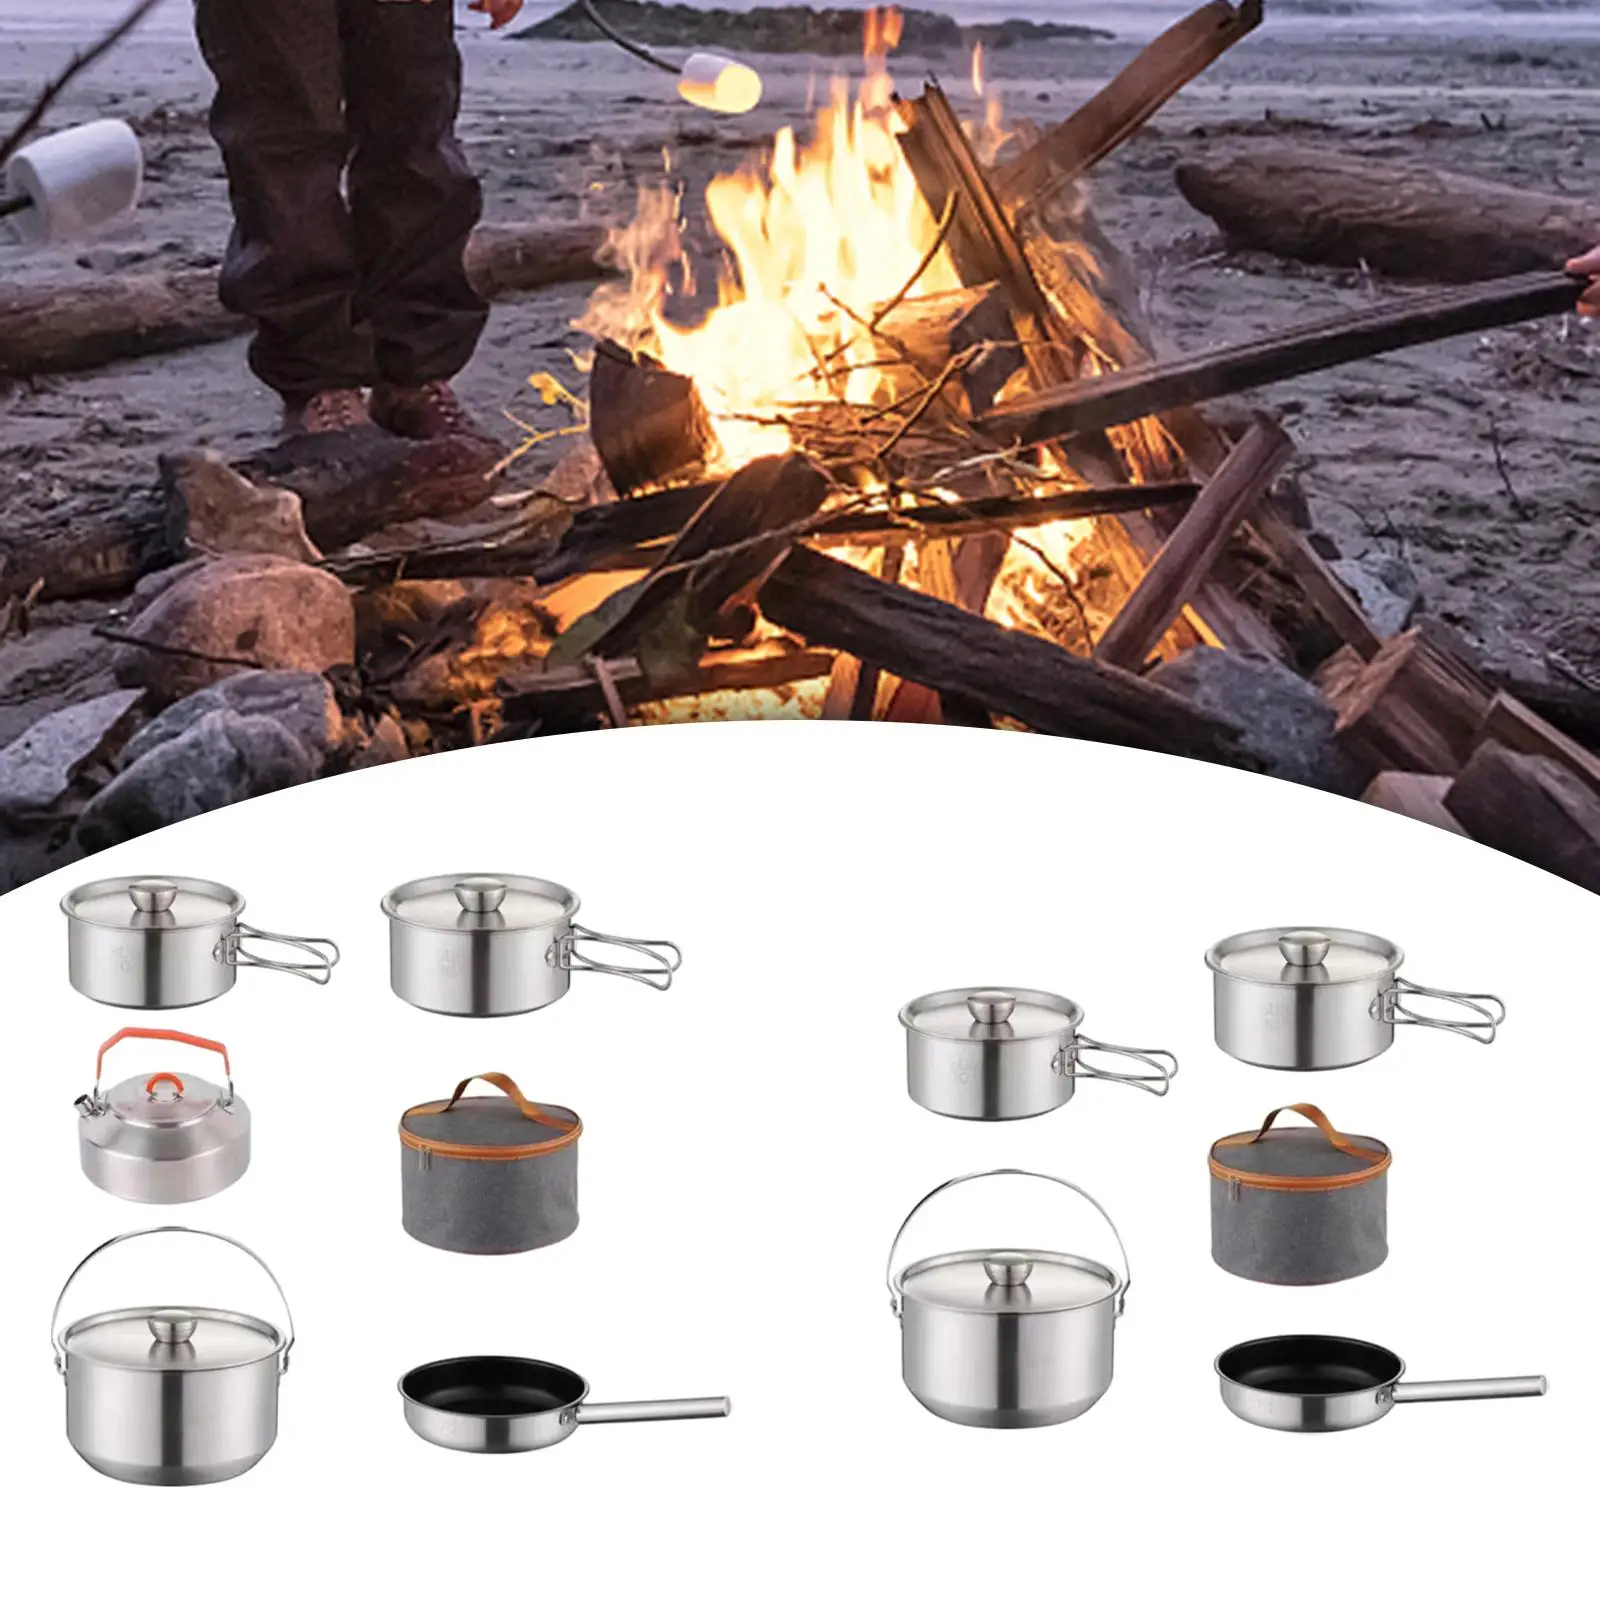 Camping Cookware Kit Outdoor Pot Stainless Steel Lightweight Cooking Set Cookset for Dinner Kitchen Travel Family Backpacking